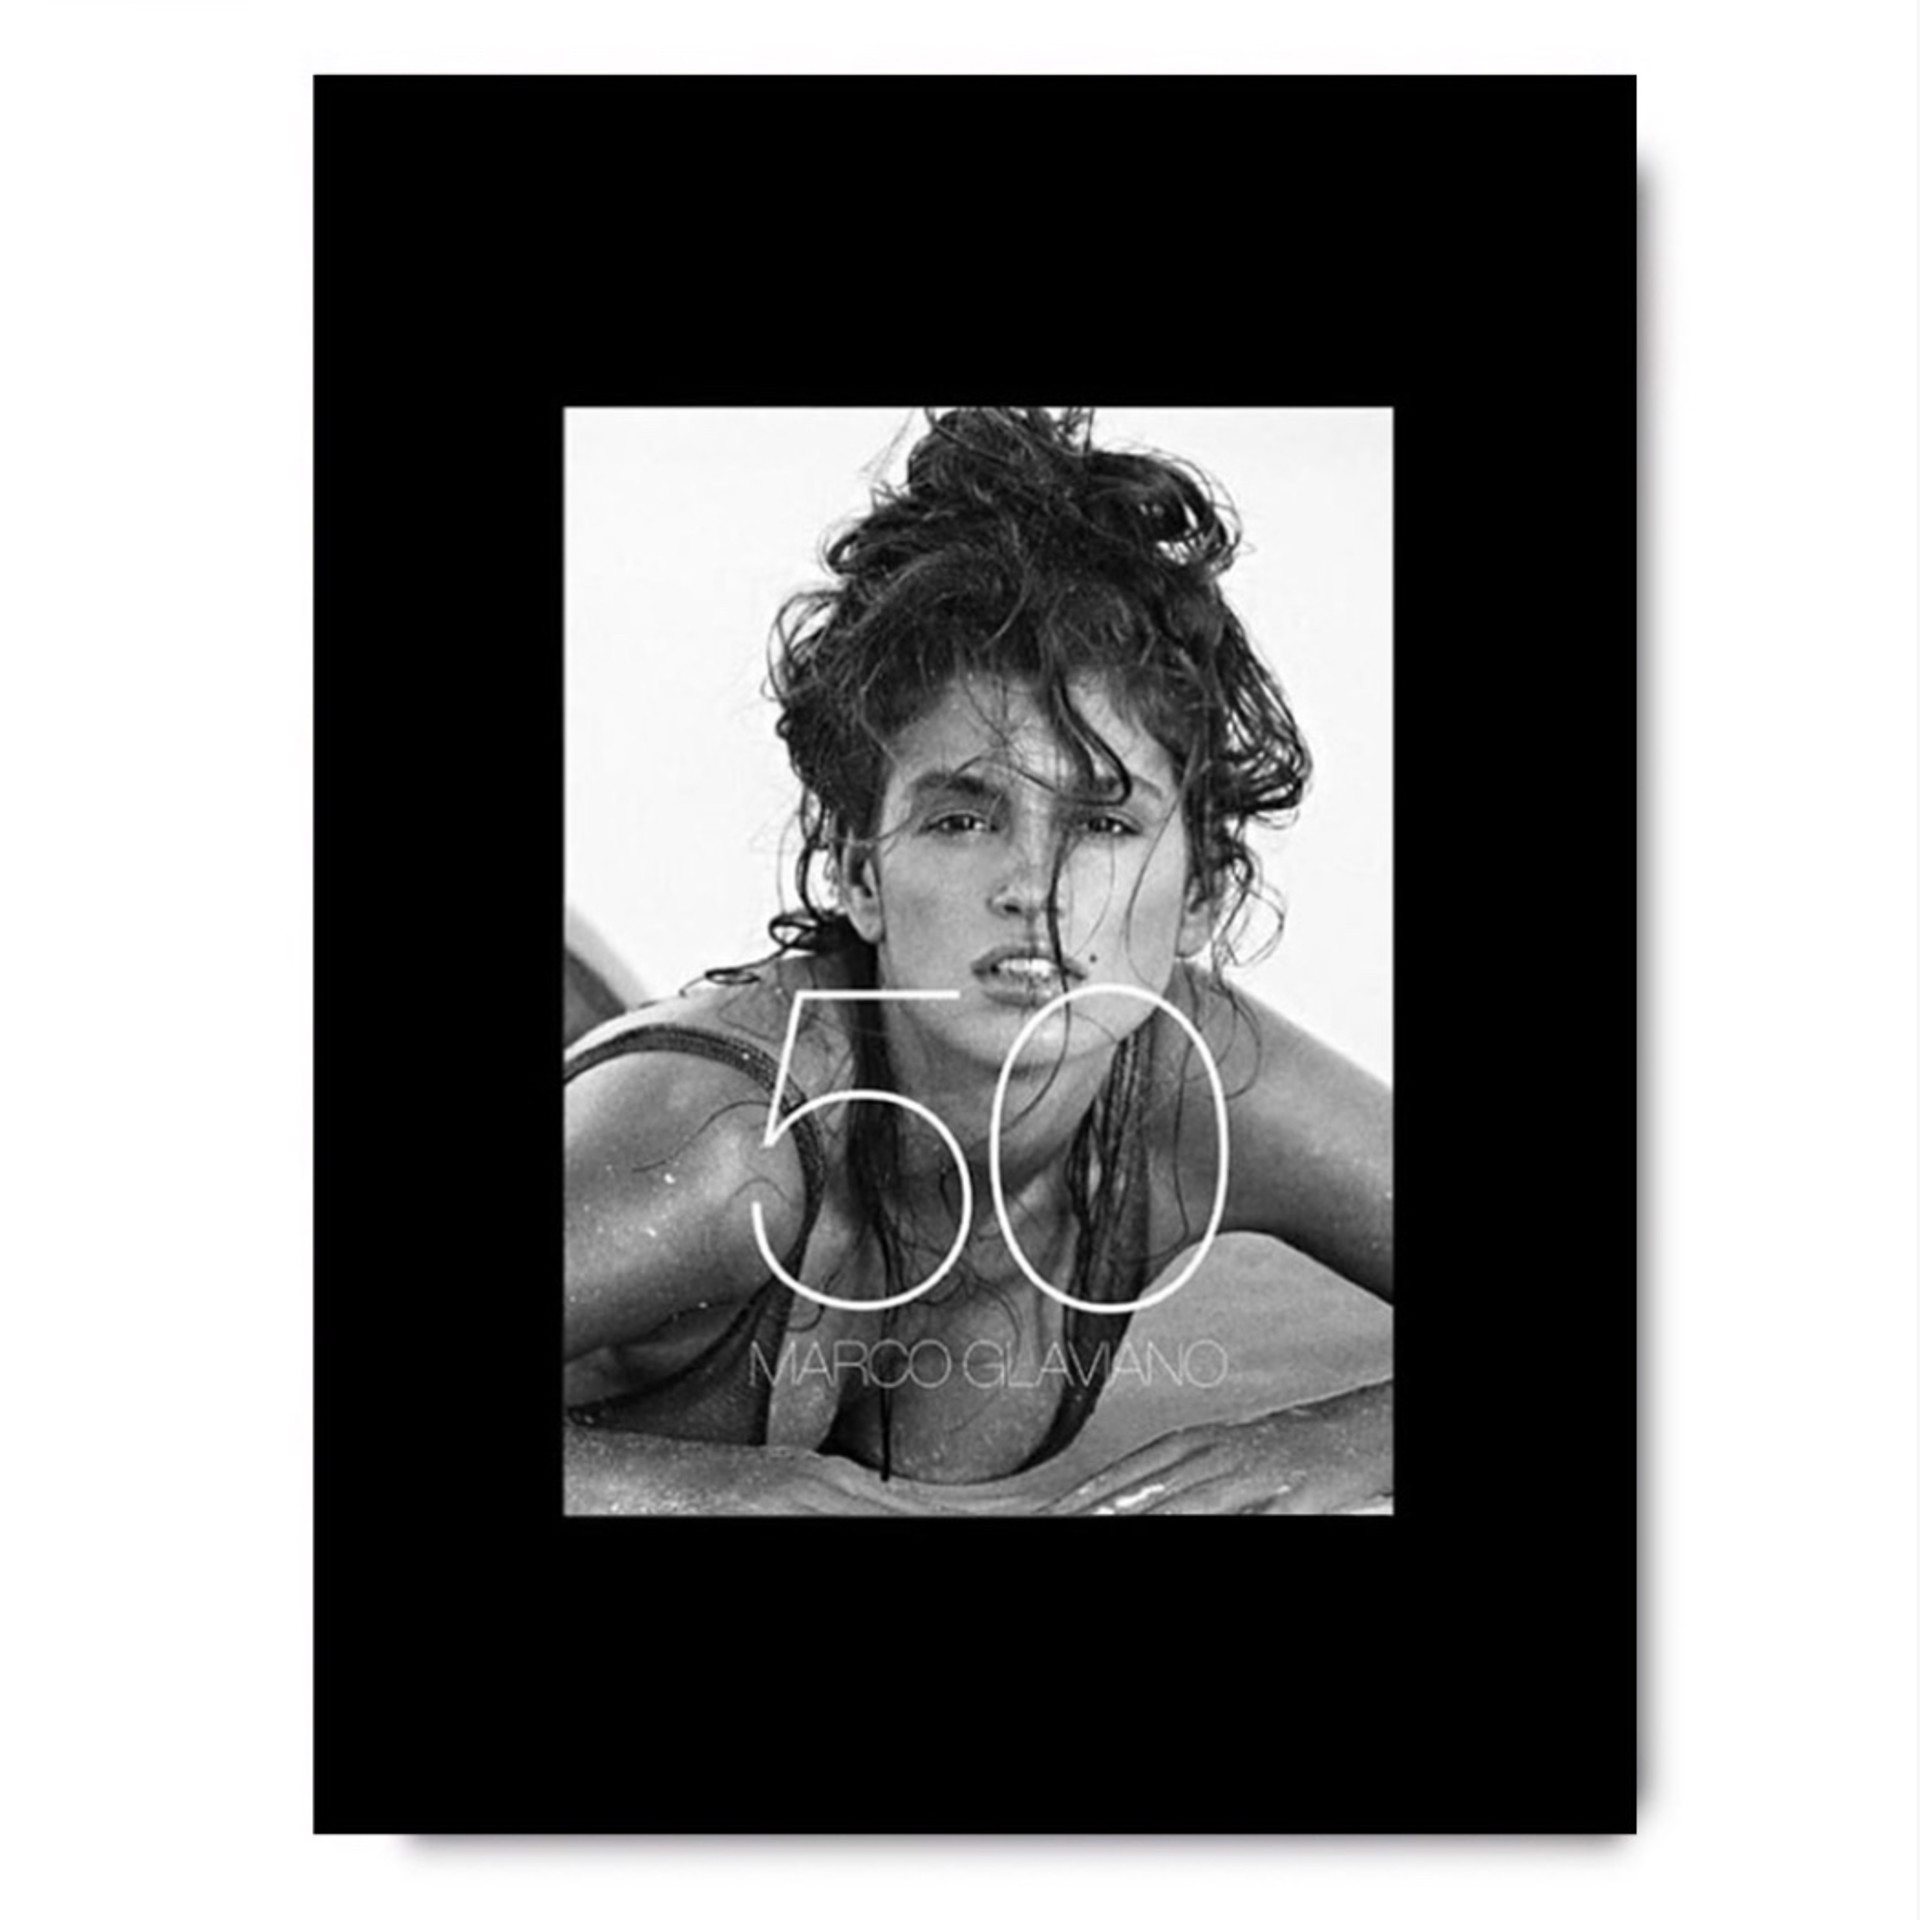 Marco Glaviano 50 [Cindy Crawford, St. Barth, #3 (1984)] by Marco Glaviano